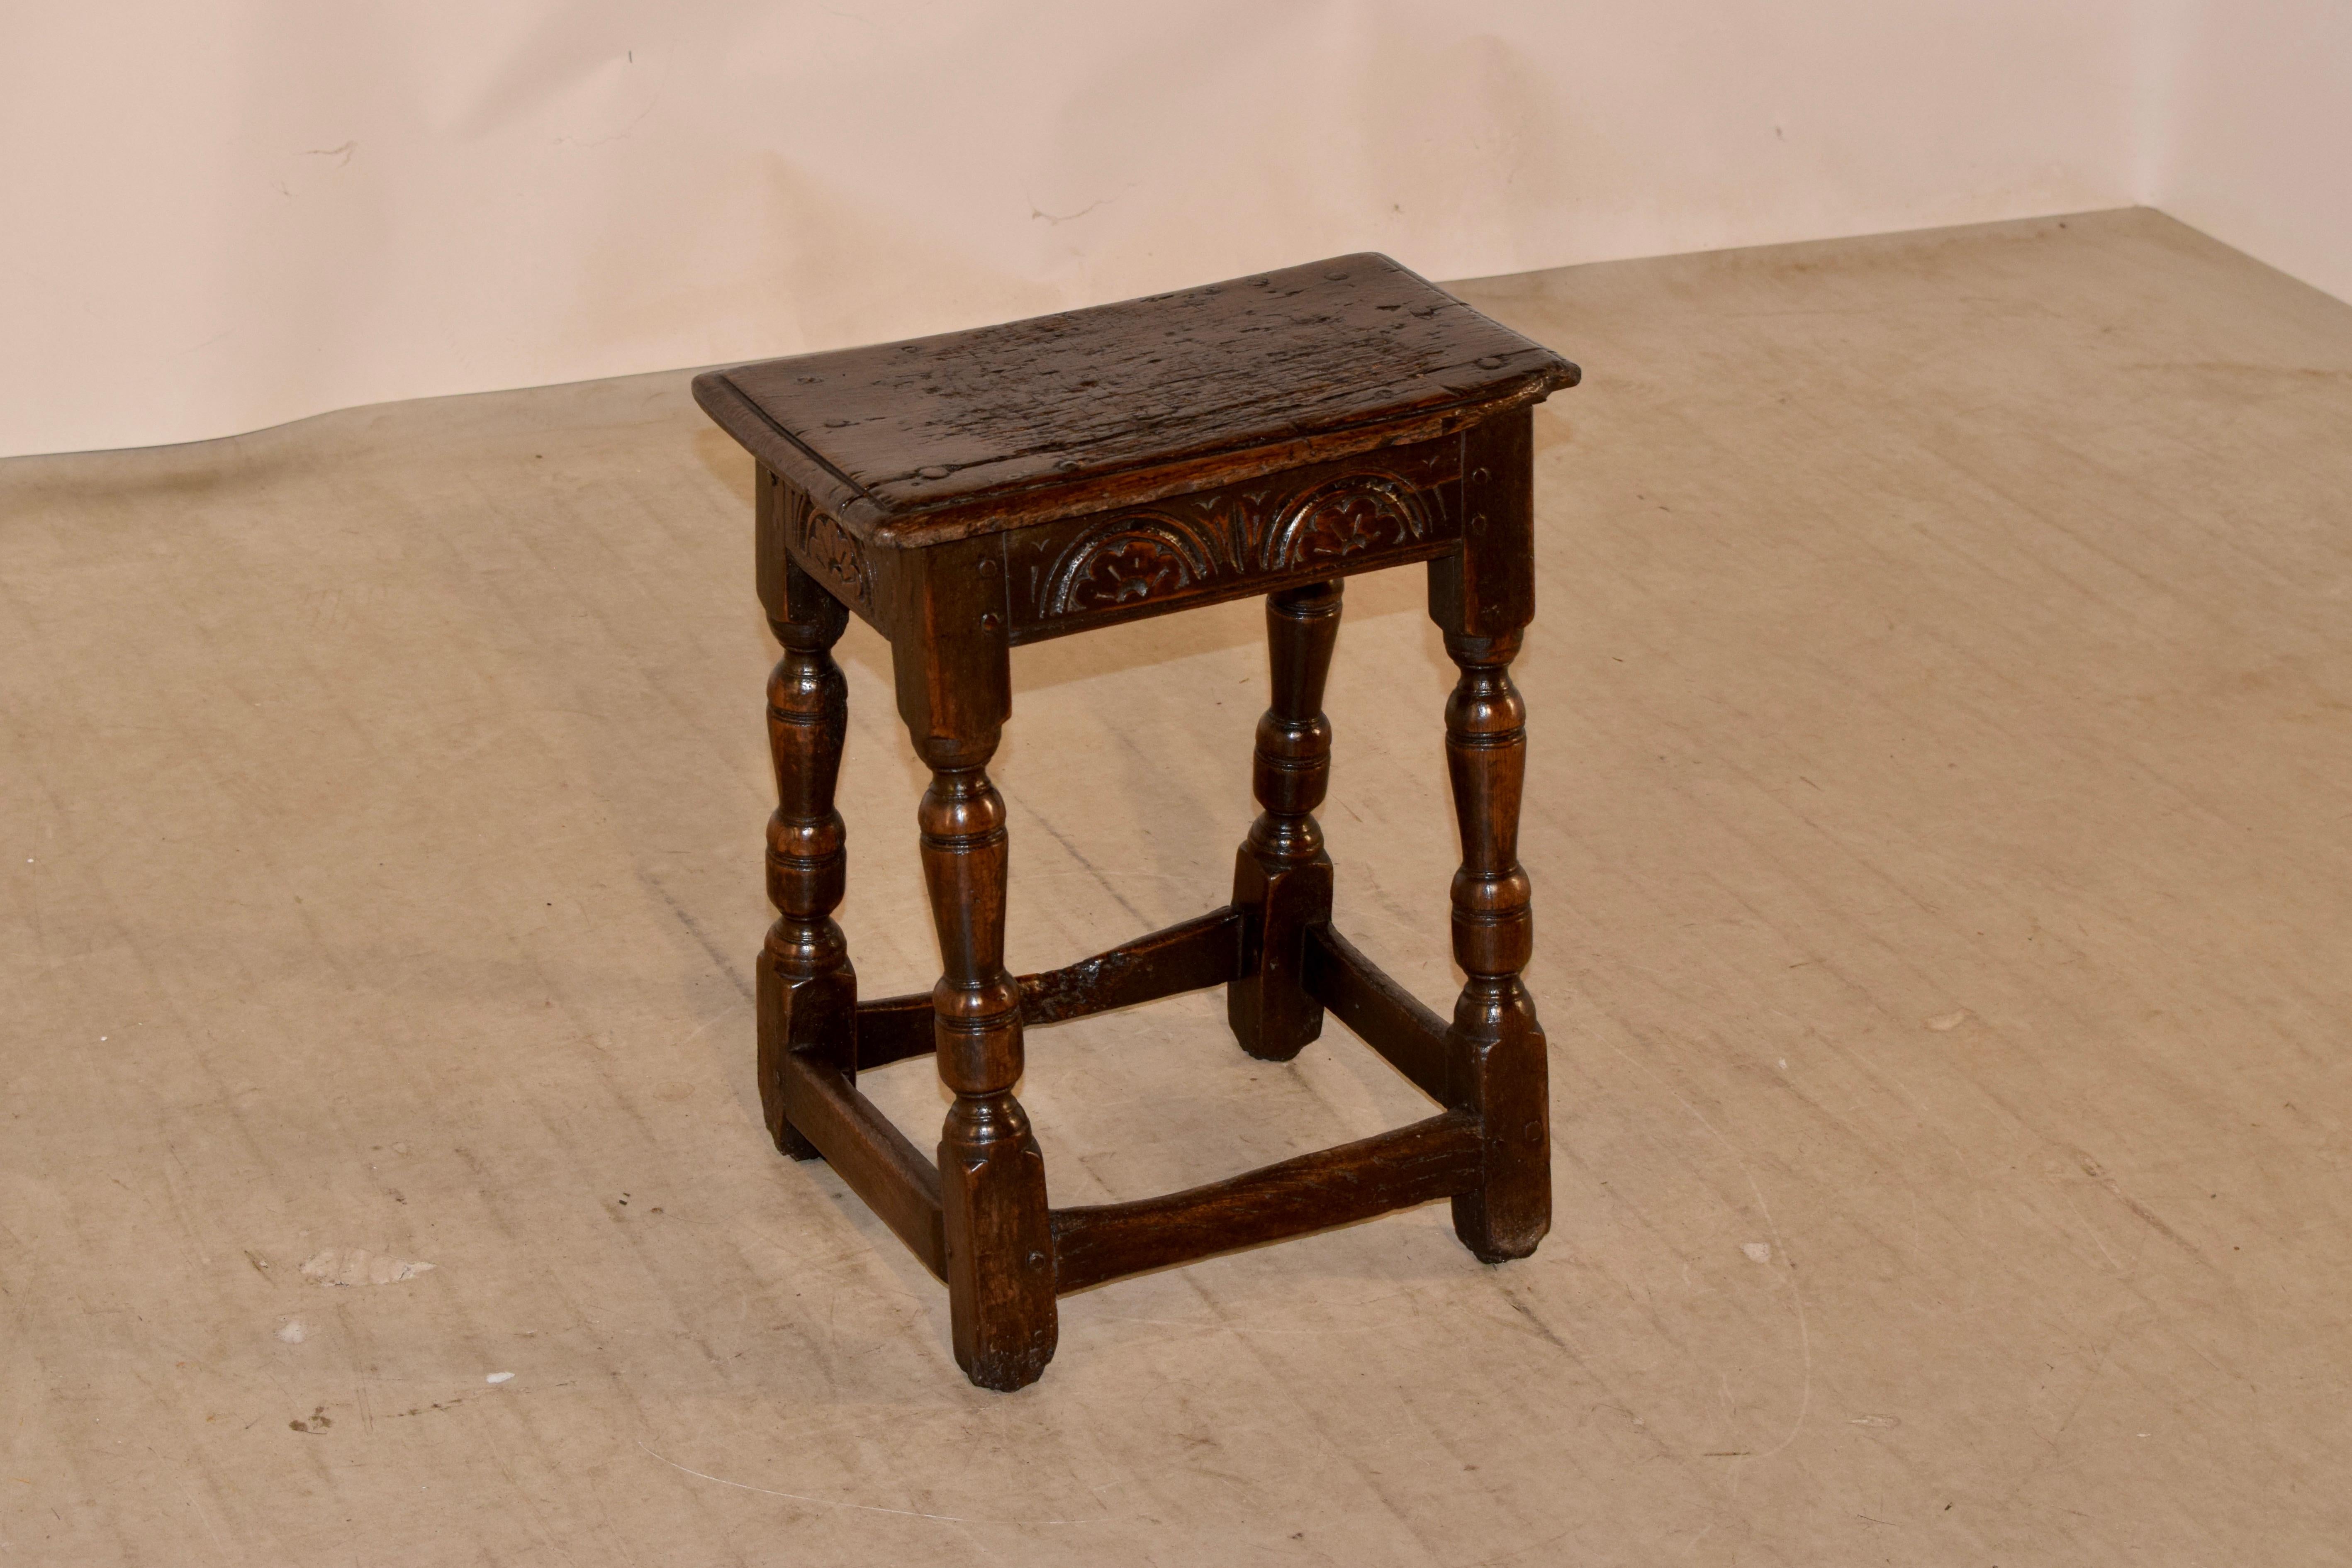 18th century oak joint stool from England with a beveled edge around the top, following down to a hand carved decorated apron, supported on hand turned legs, joined by simple stretchers, which are deliciously worn from age and use.